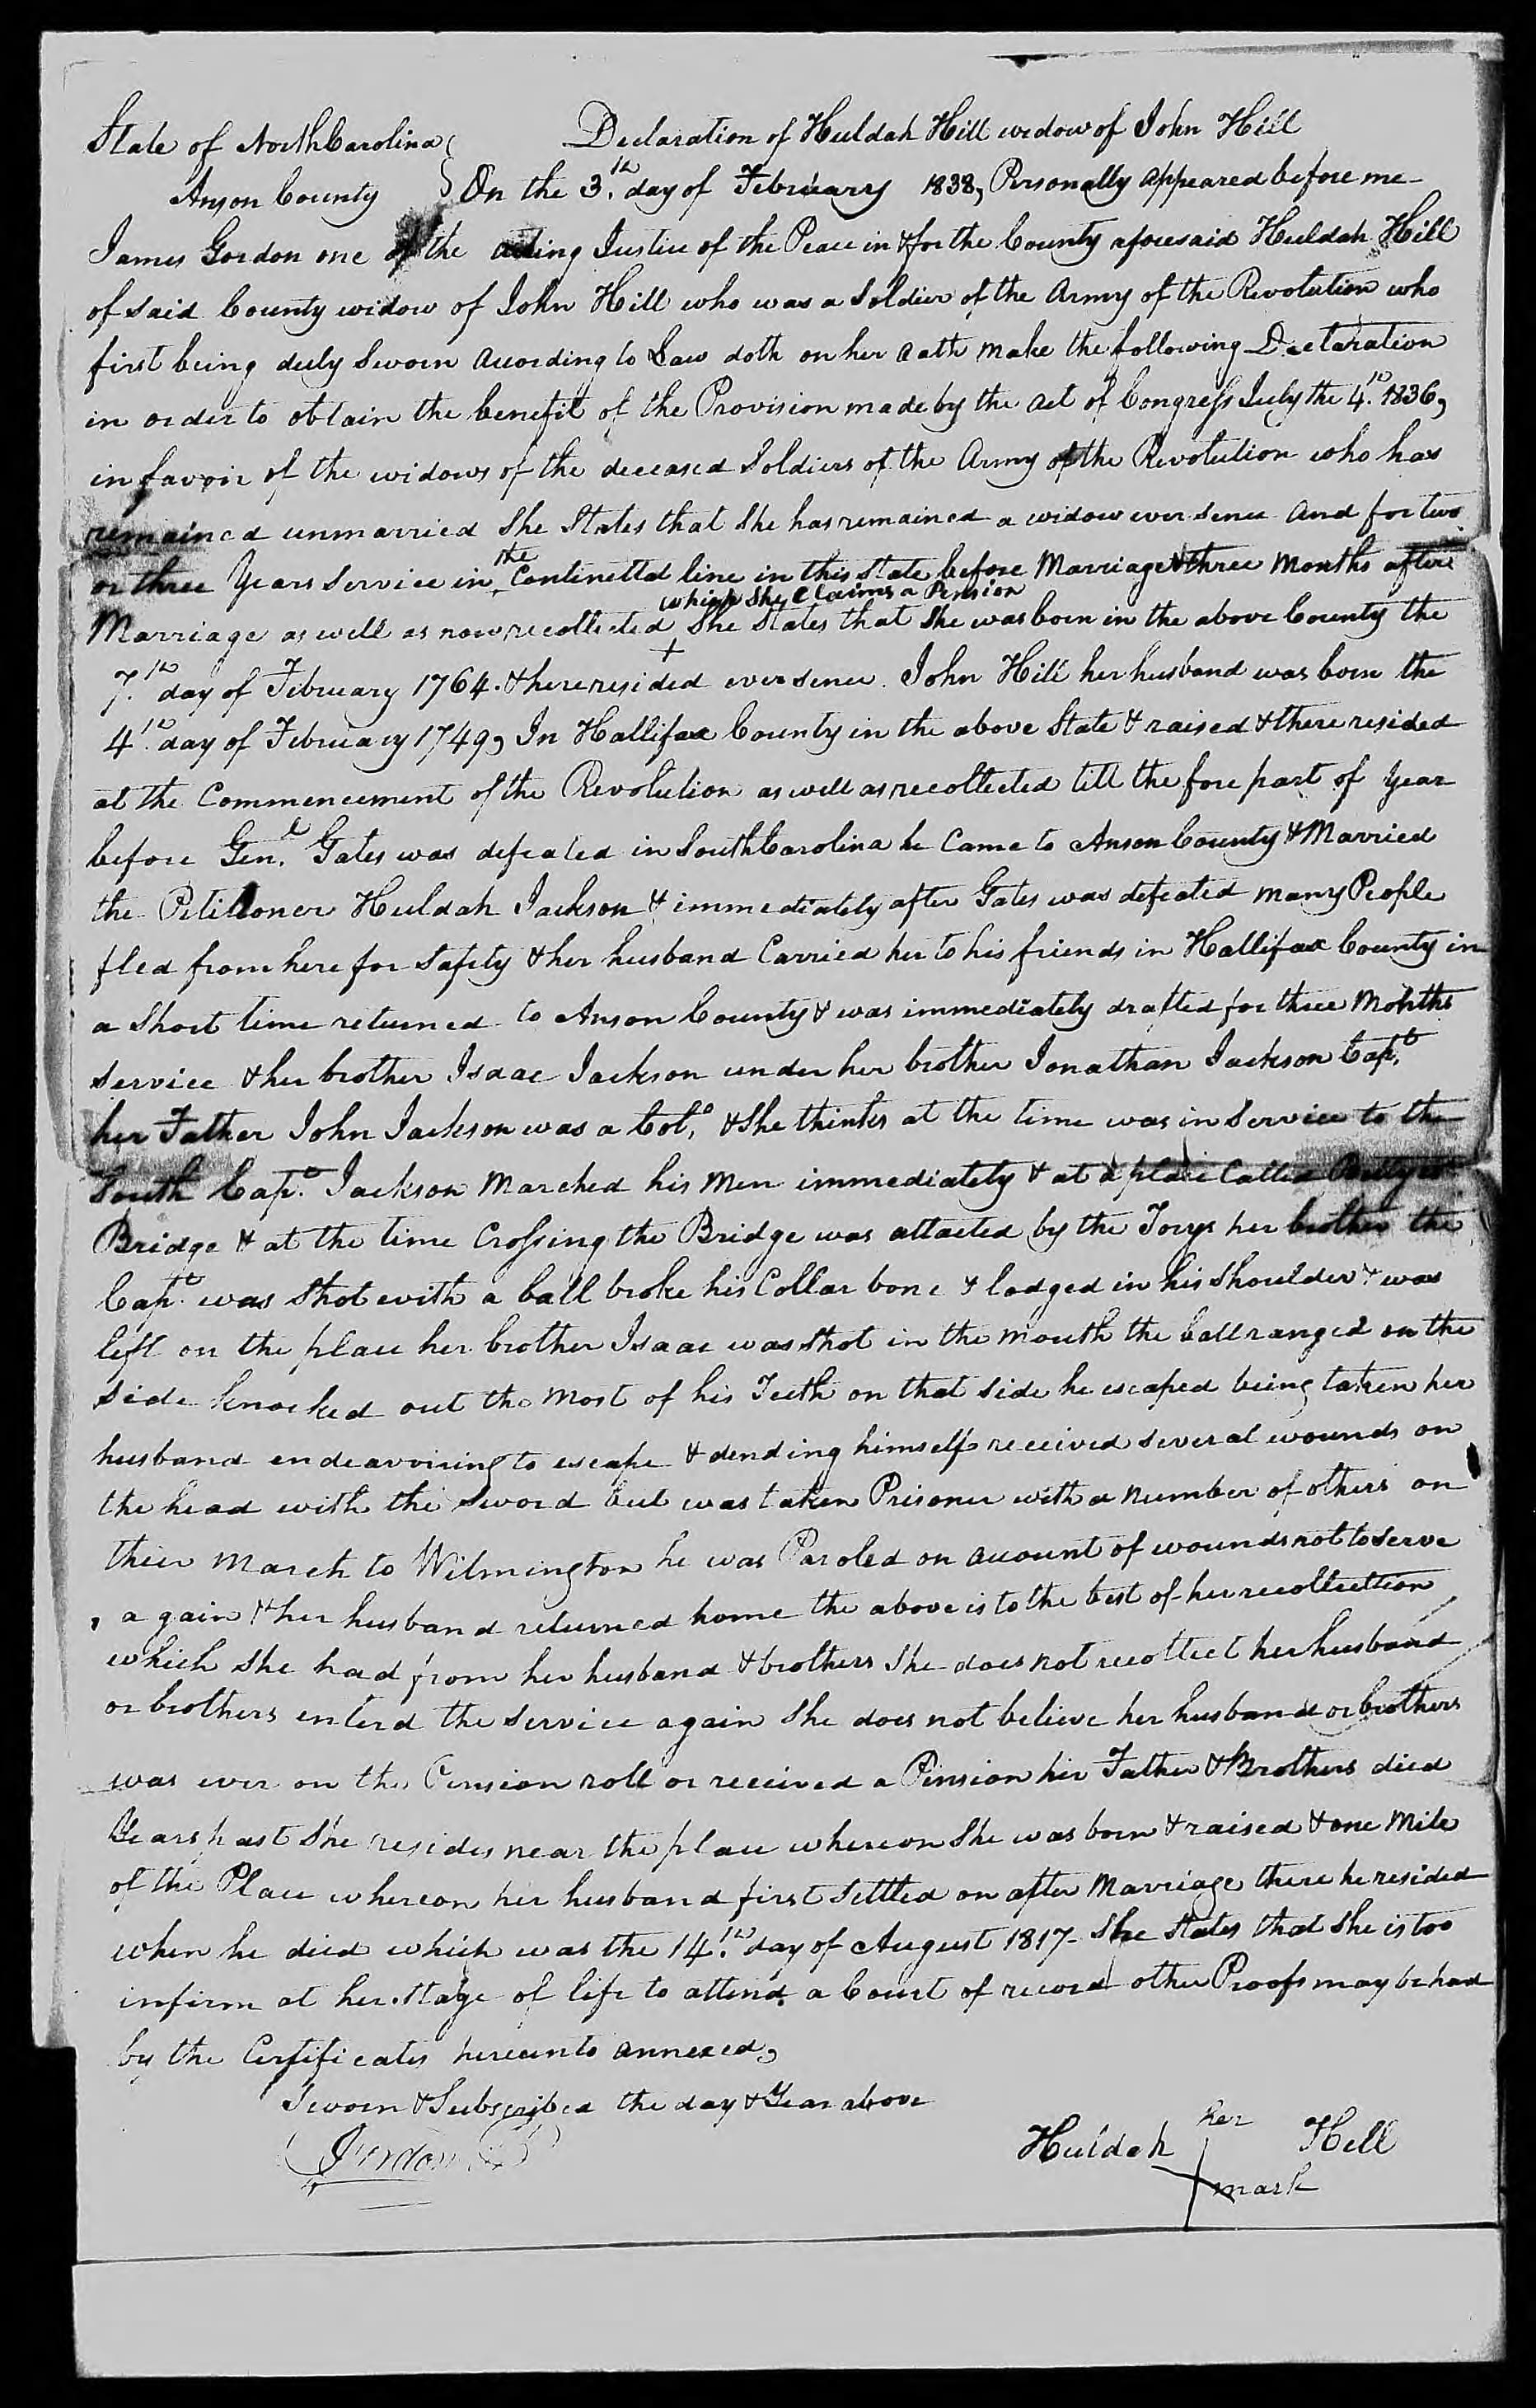 Application for a Widow's Pension from Huldah Hill, 3 February 1838, page 1